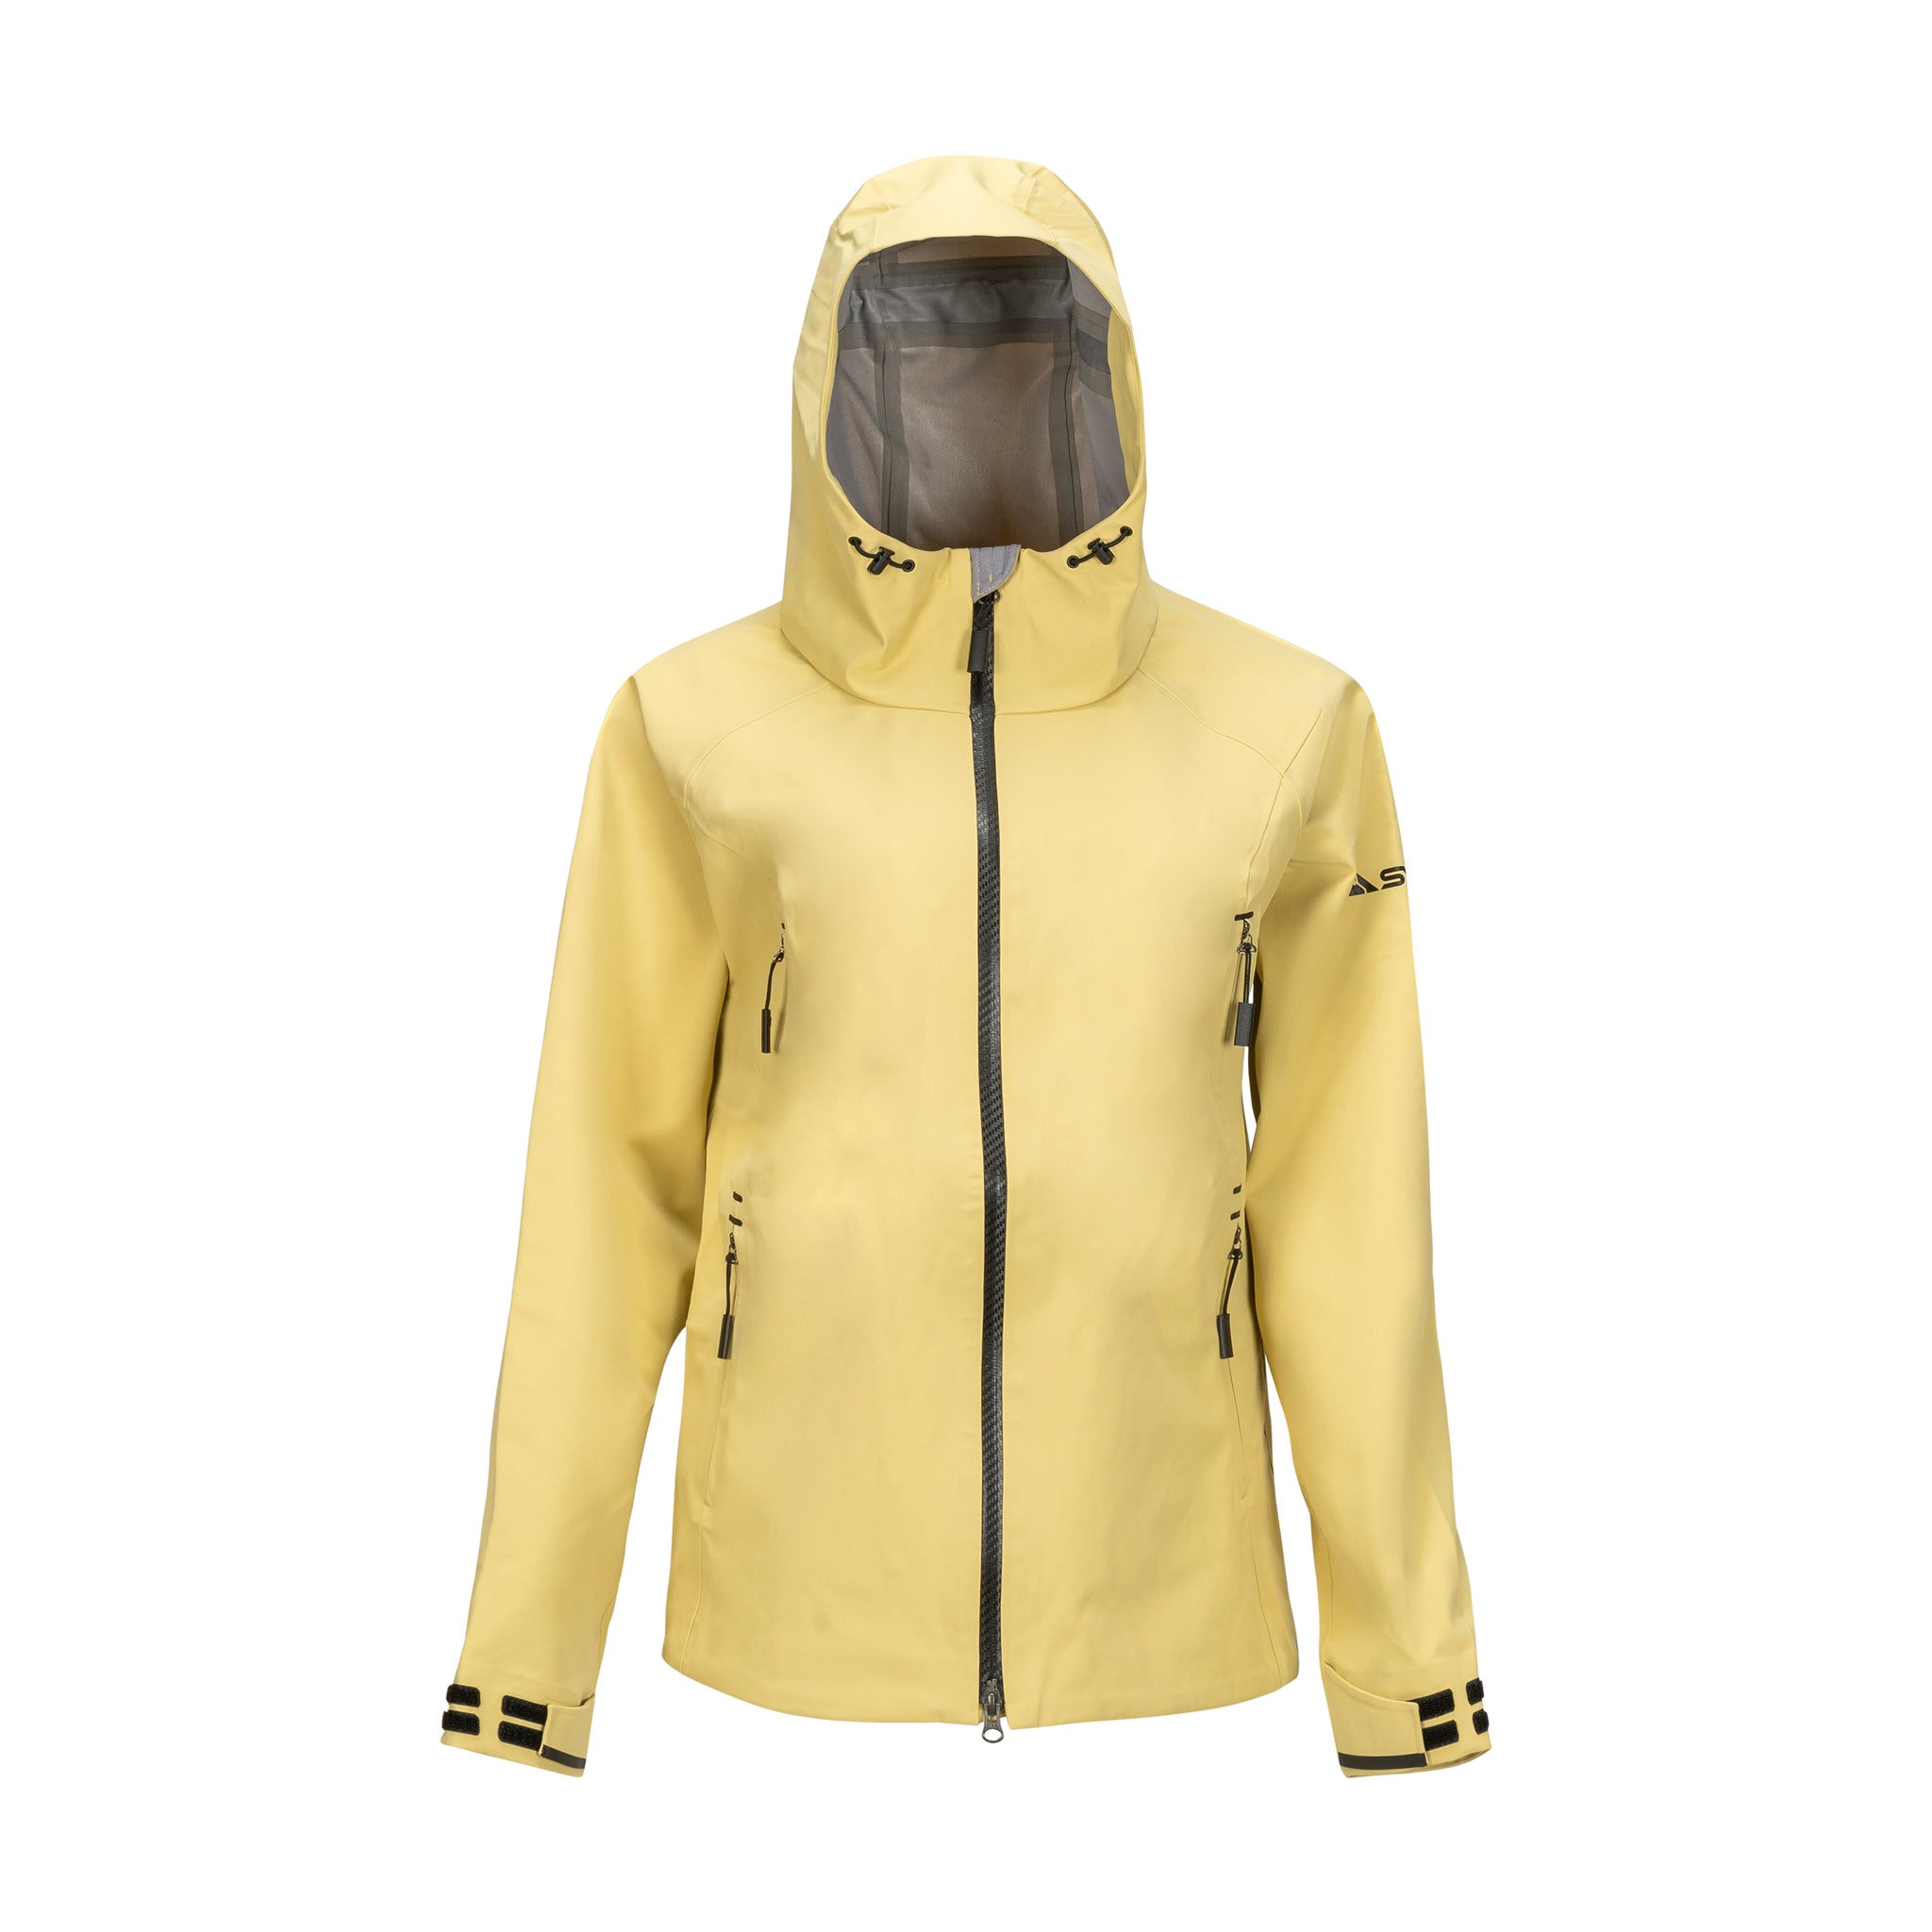 sync-performance-headwall-shell-jacket-dried-moss-front